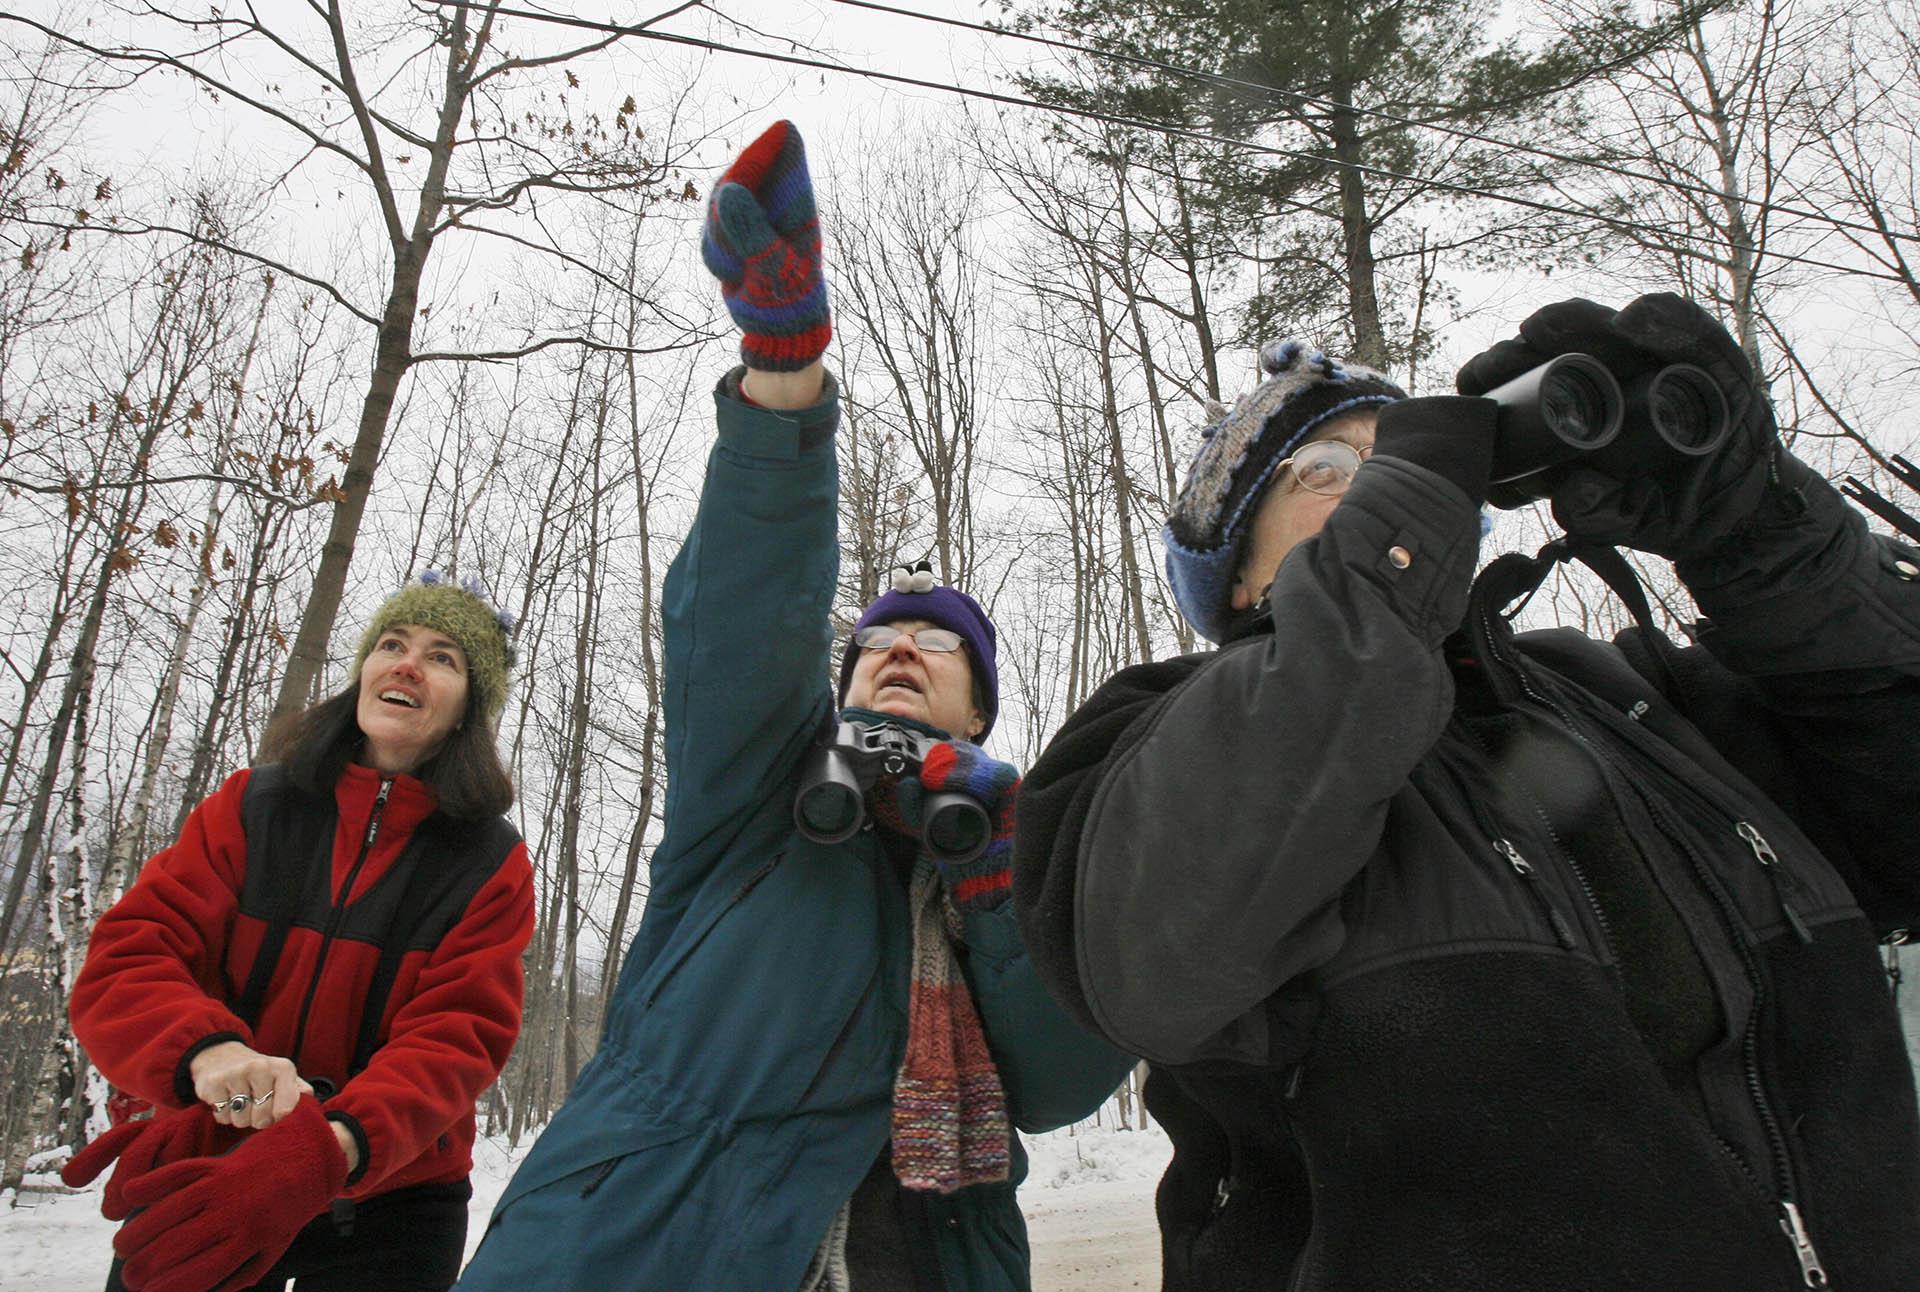  In this Dec. 19, 2008, file photo, Jeannie Elias, left, Mary Spencer, and Alison Wagner look for birds in Fayston, Vermont, as they take part in The National Audubon Society’s annual Christmas Bird Count. (AP Photo / Toby Talbot, File)